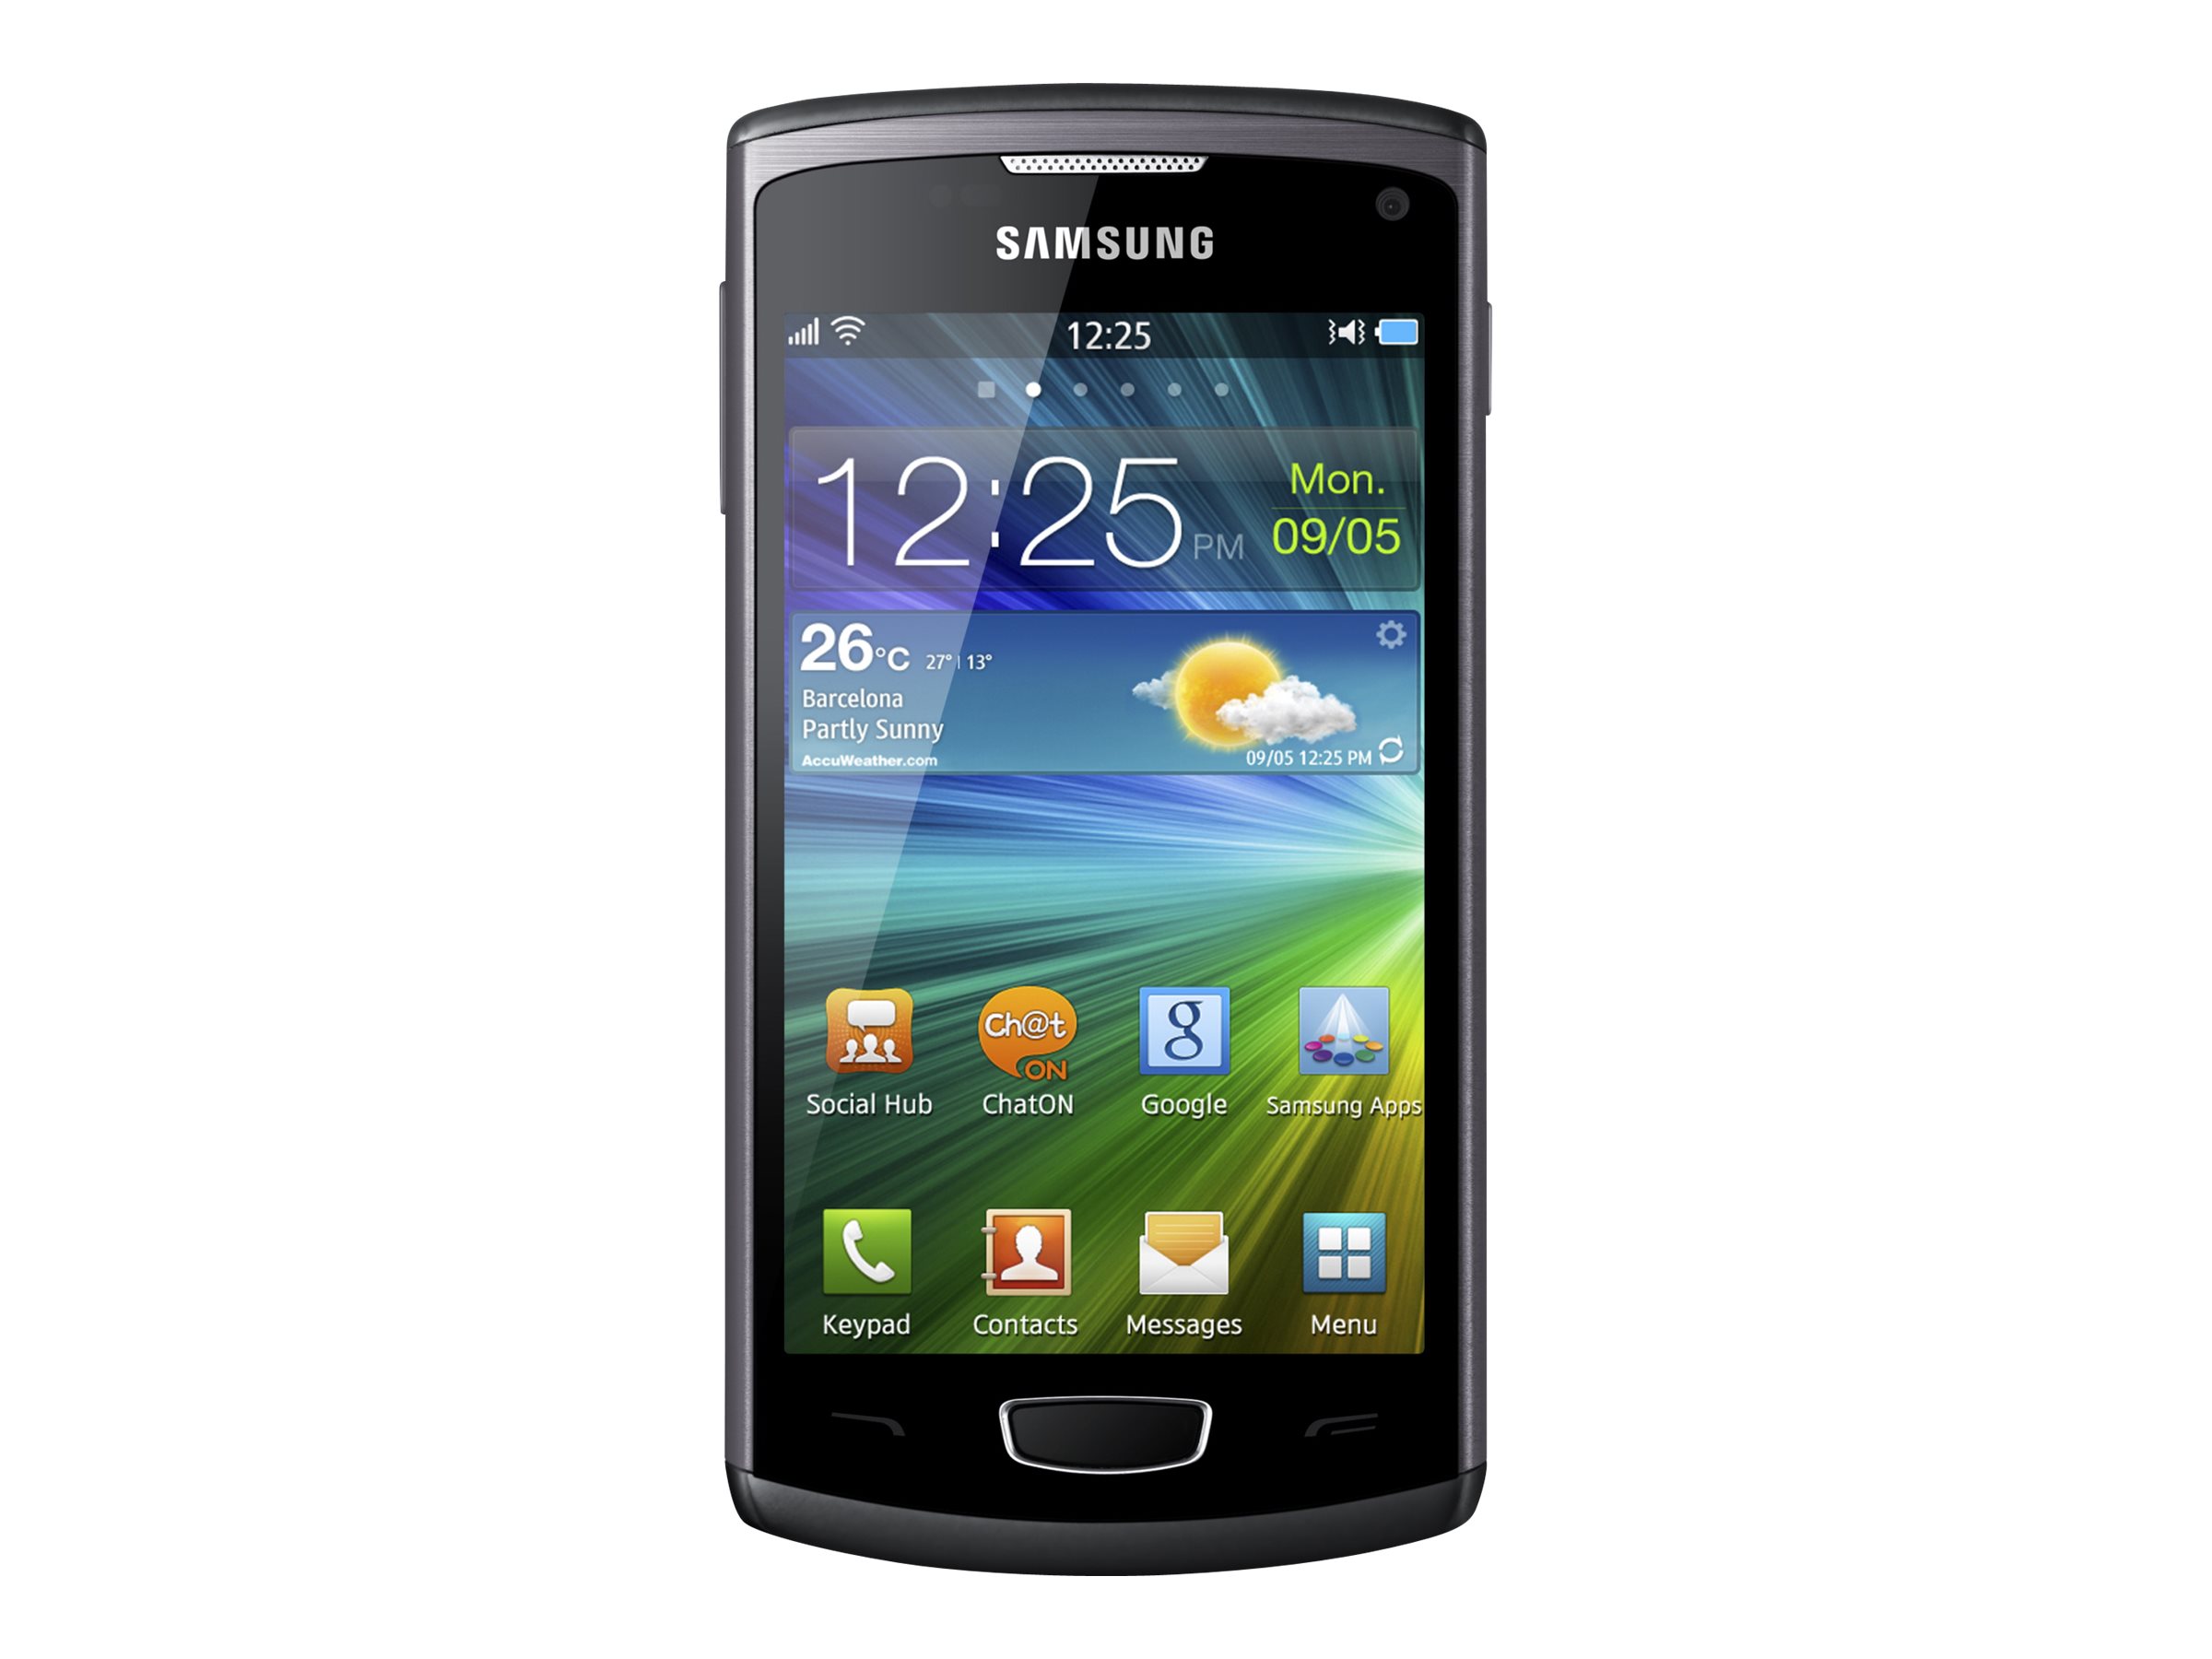 Samsung S8600 Wave 3 - Full phone specifications